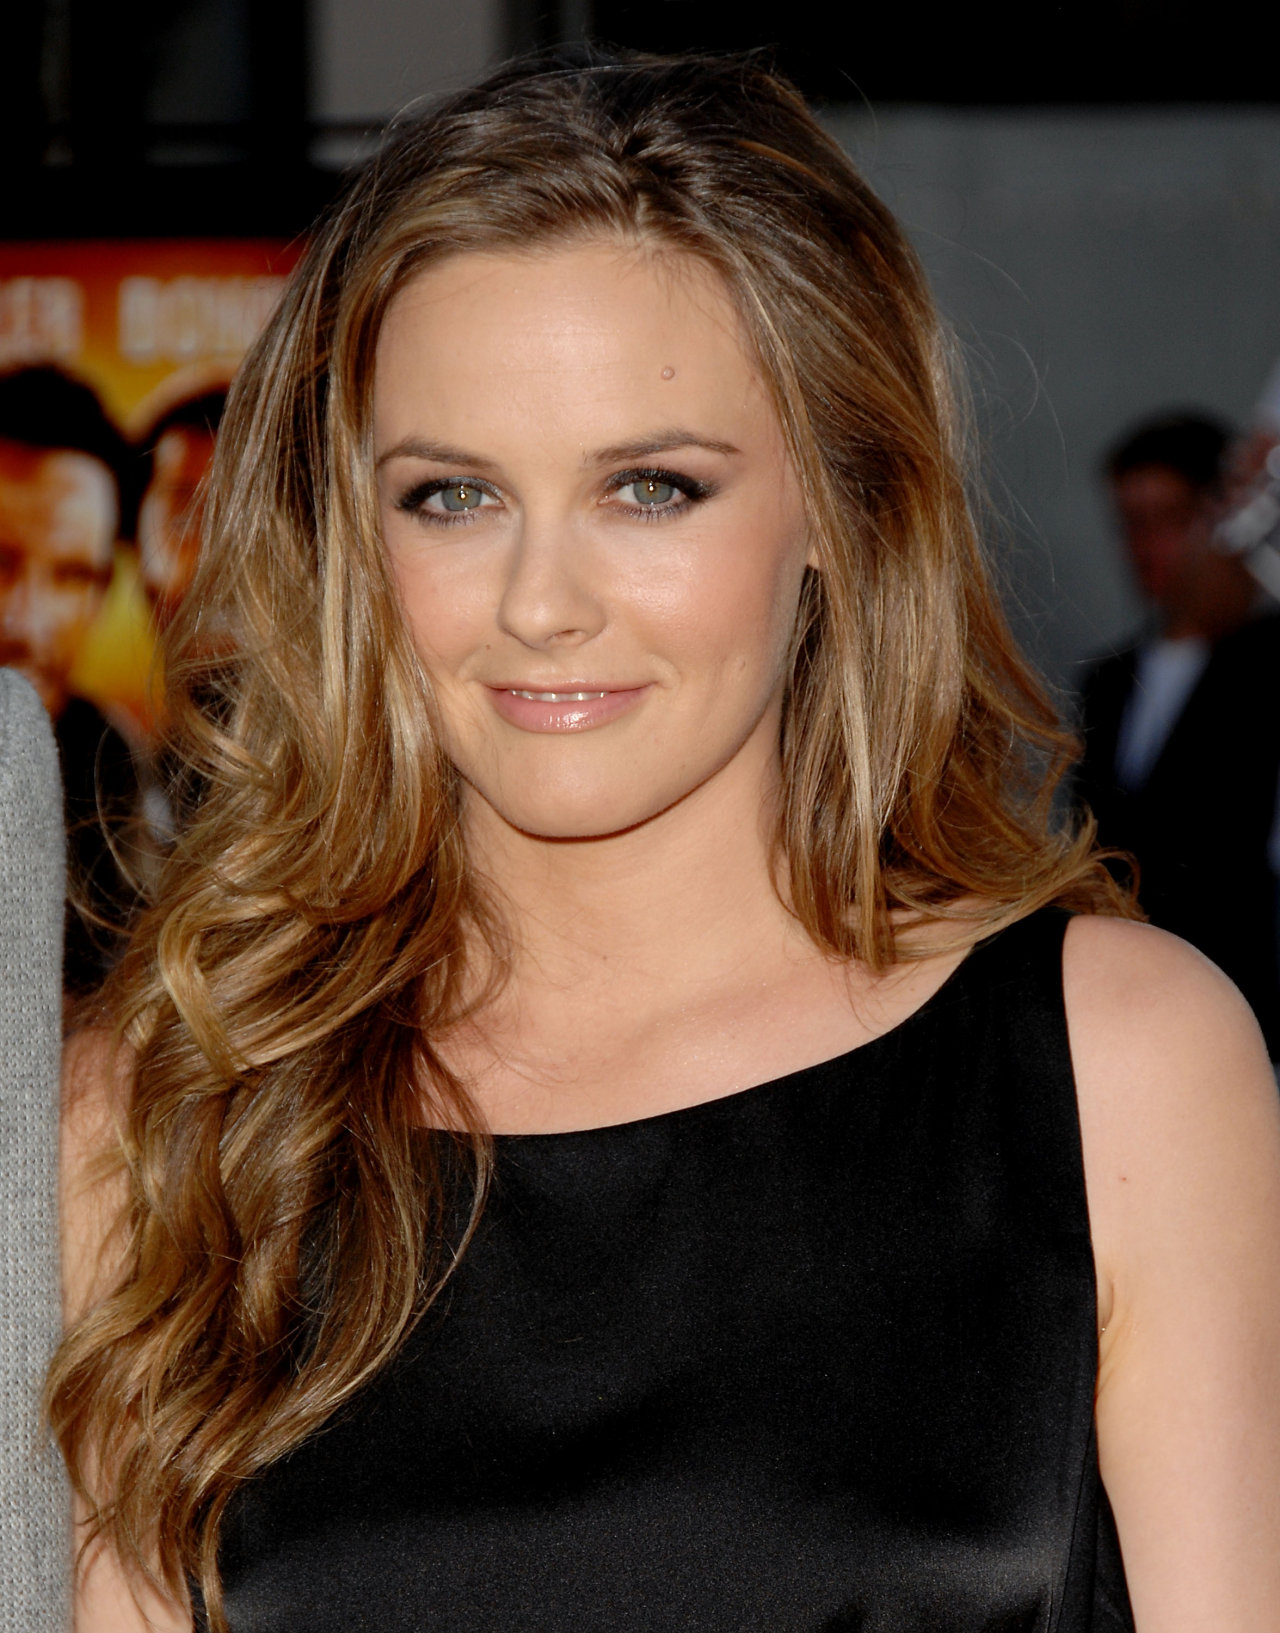 Alicia Silverstone leaked wallpapers